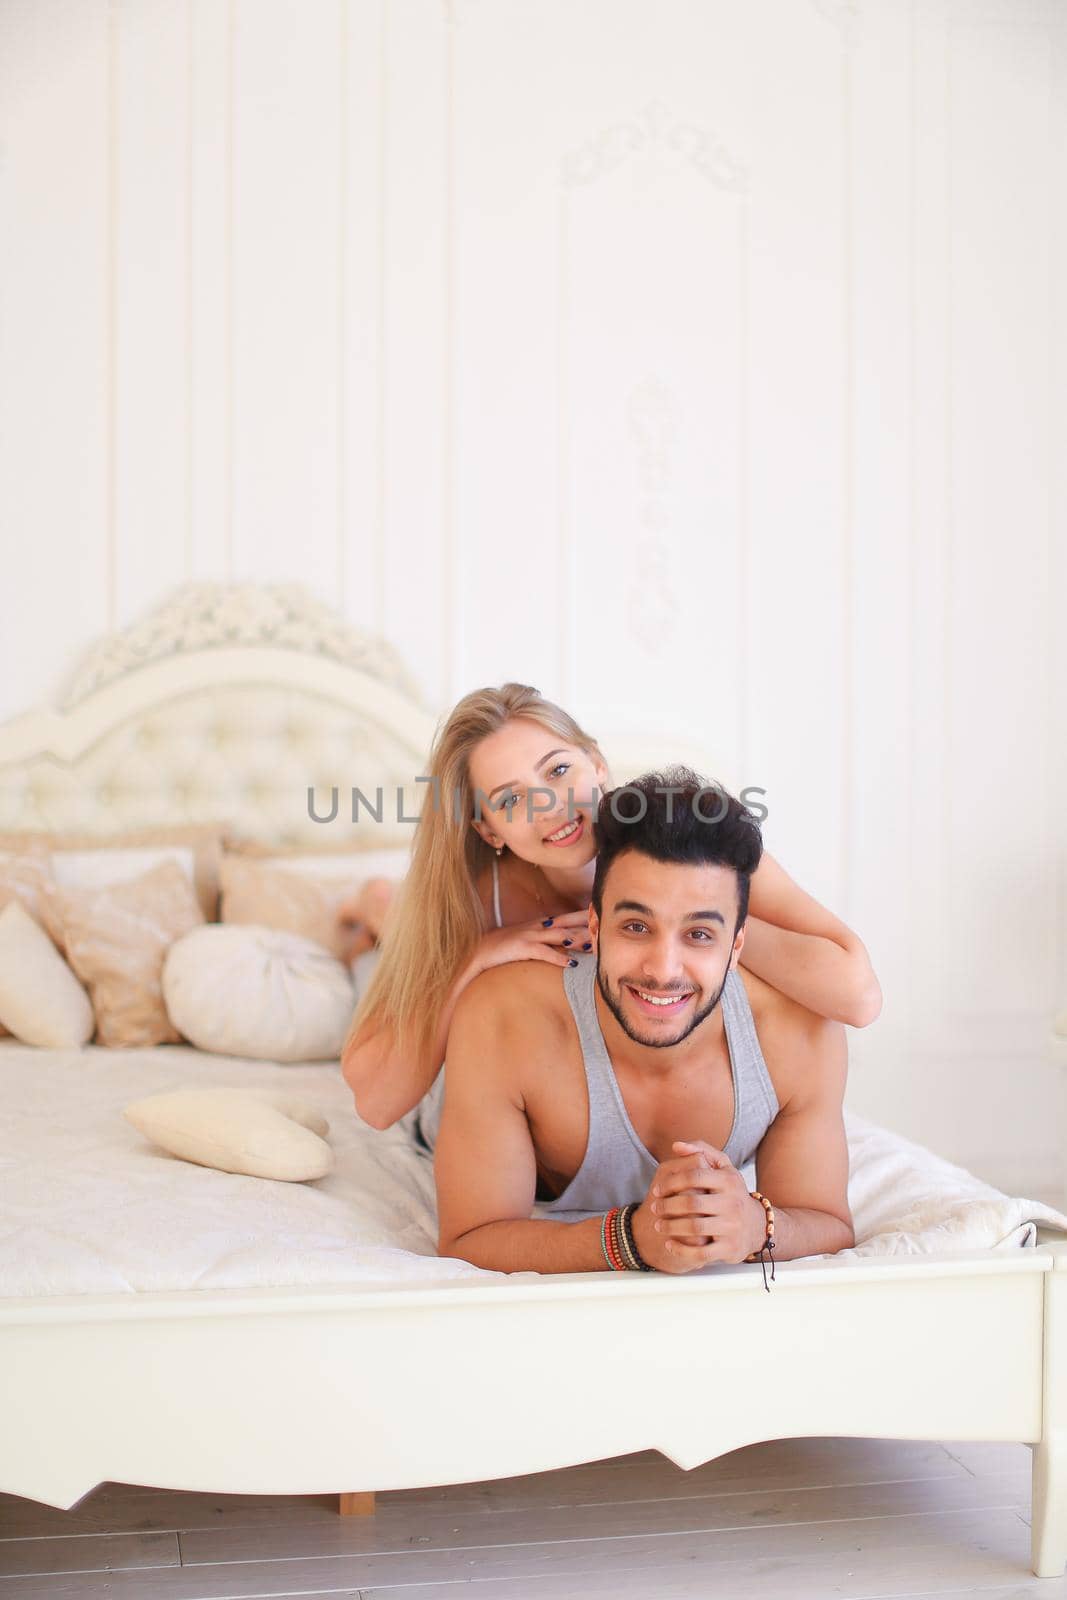 Blonde happy girl and hispanic biy lying in bad in morning. Concept of happy couple and resting on weekends in bedroom.